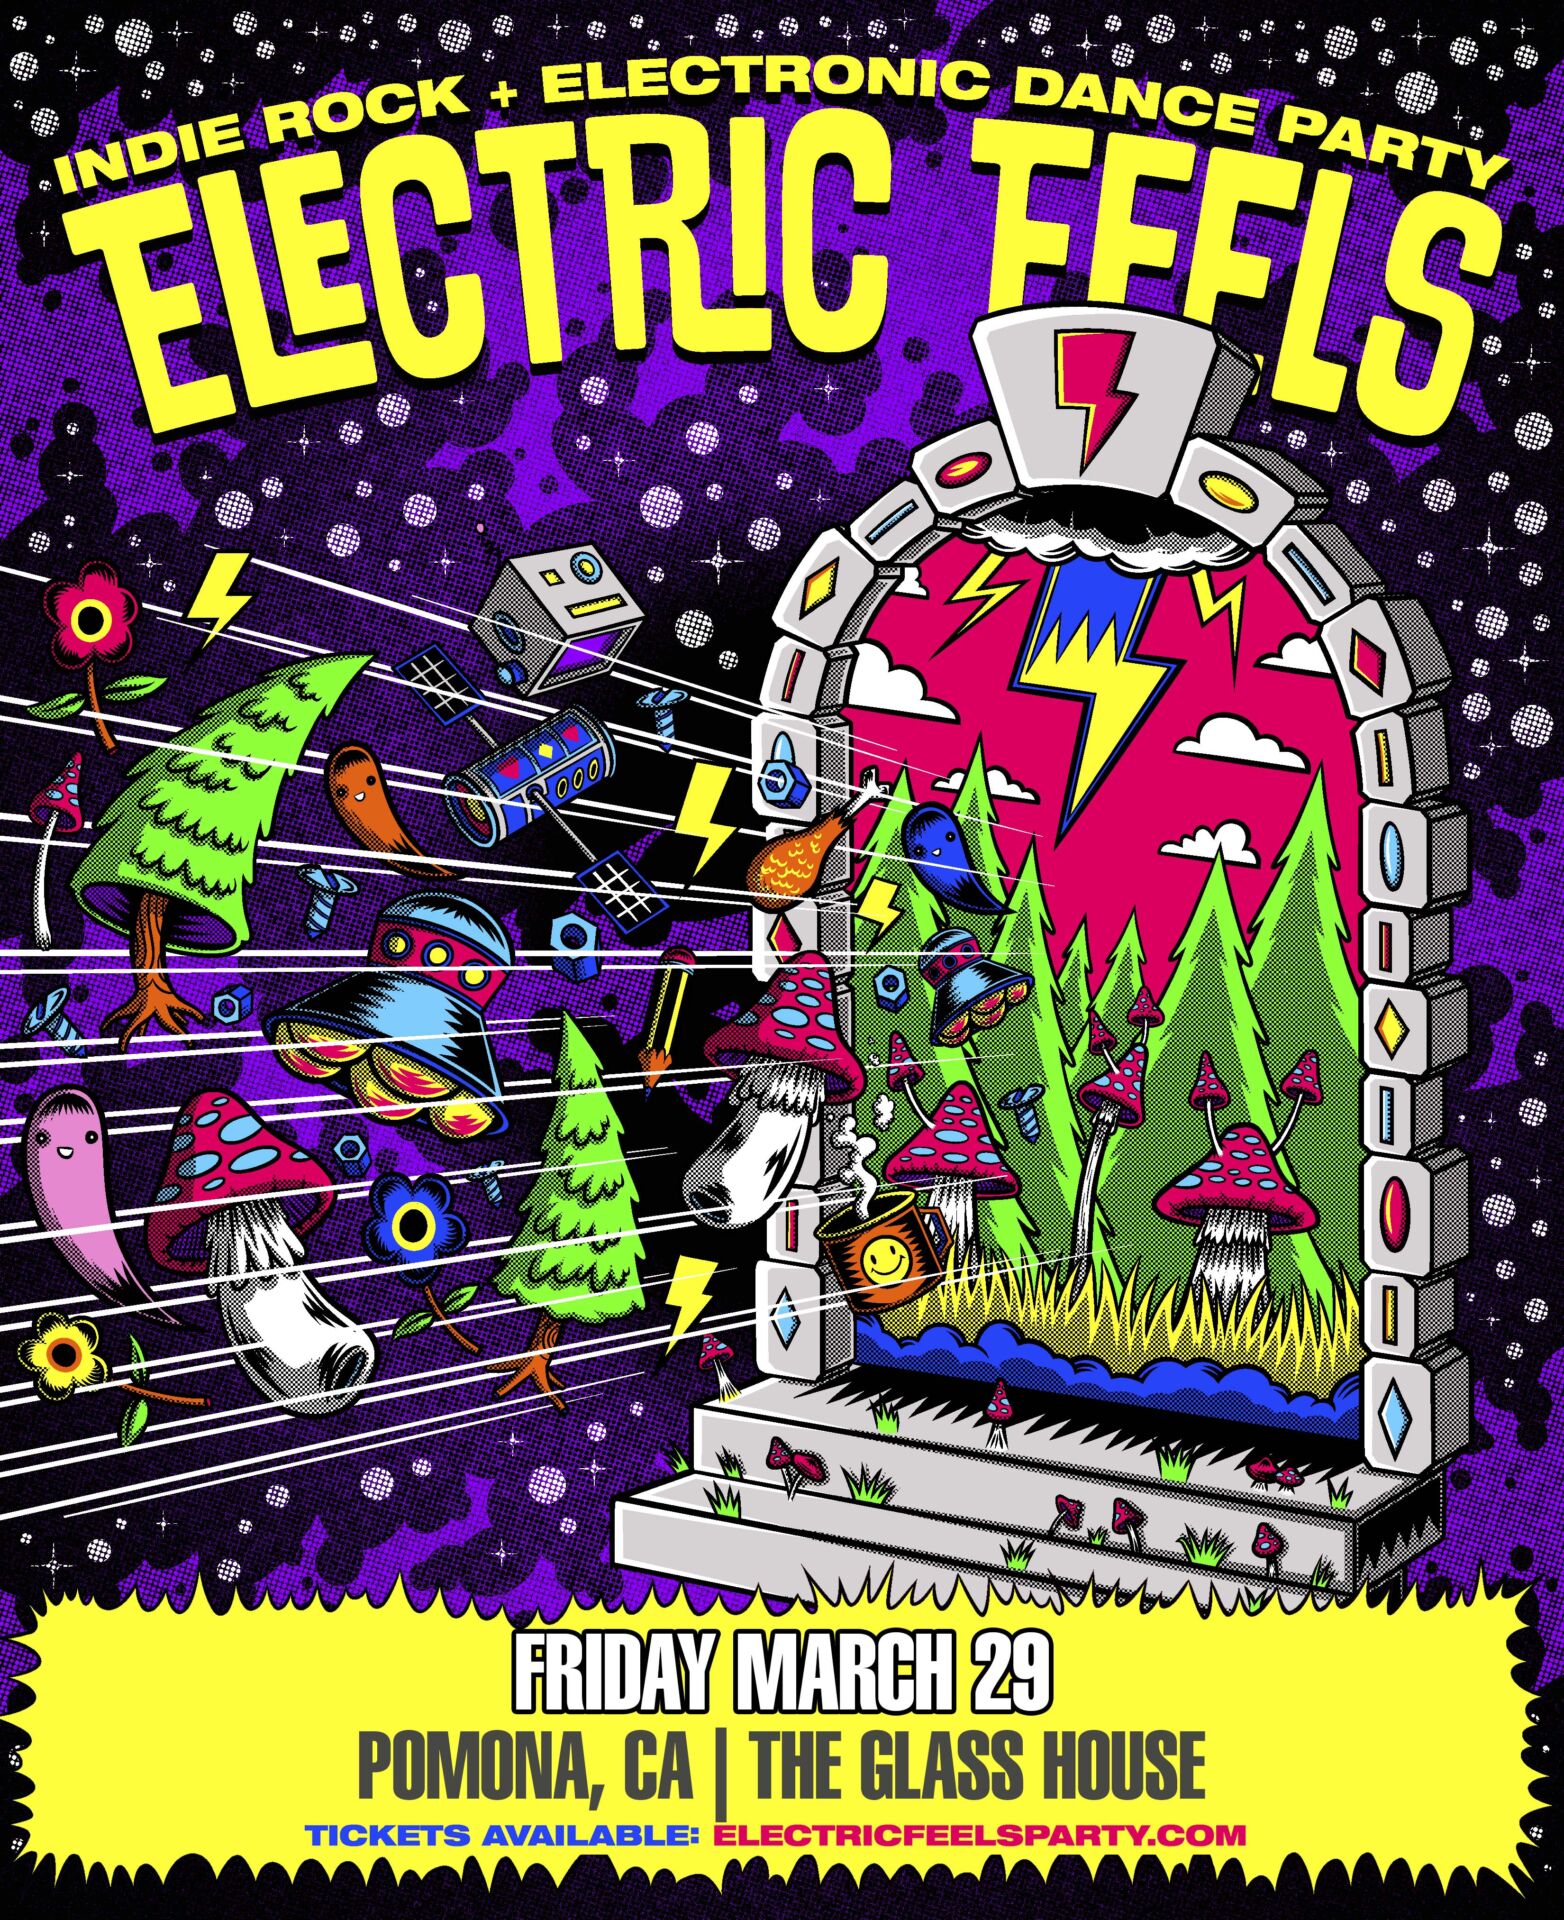 Electric Feels at The Glass House